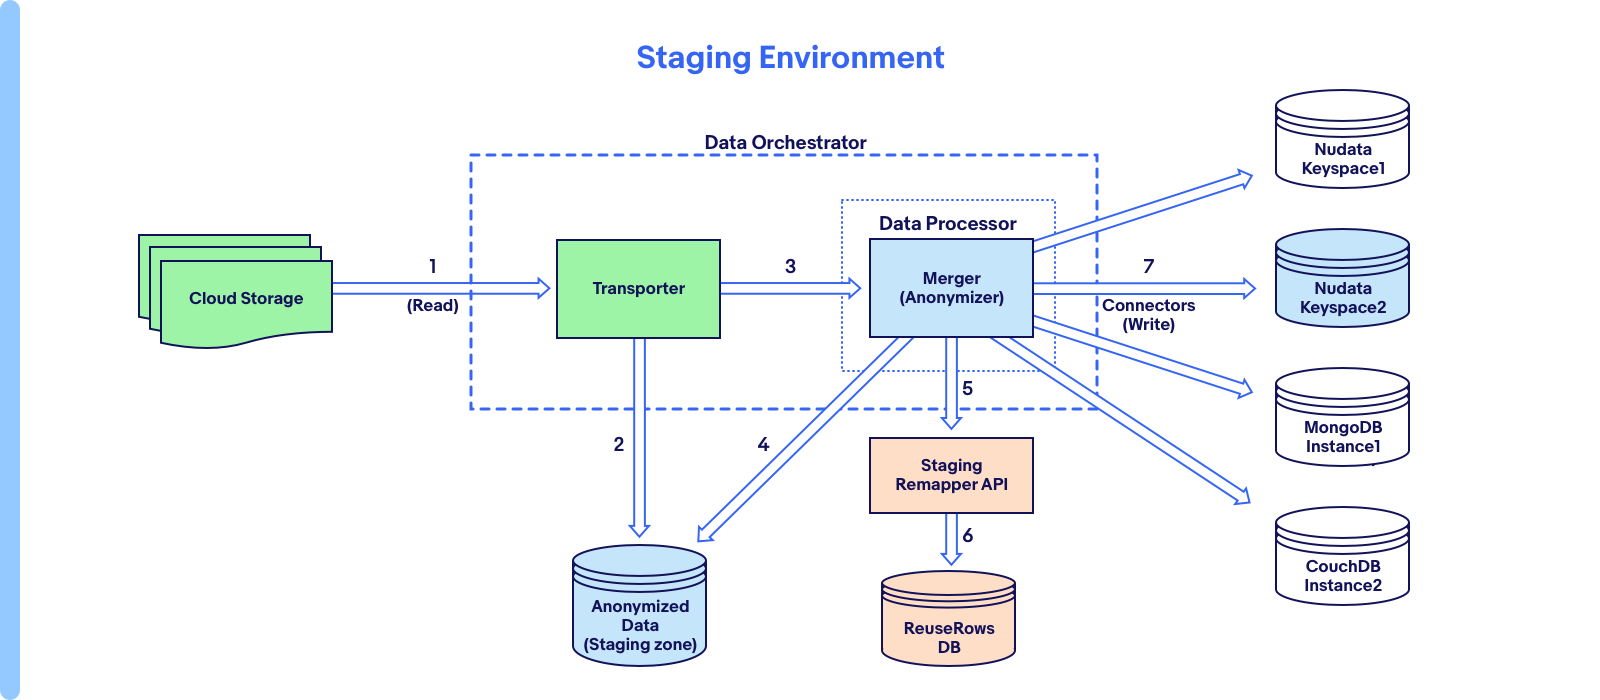 A flow chart of the staging environment